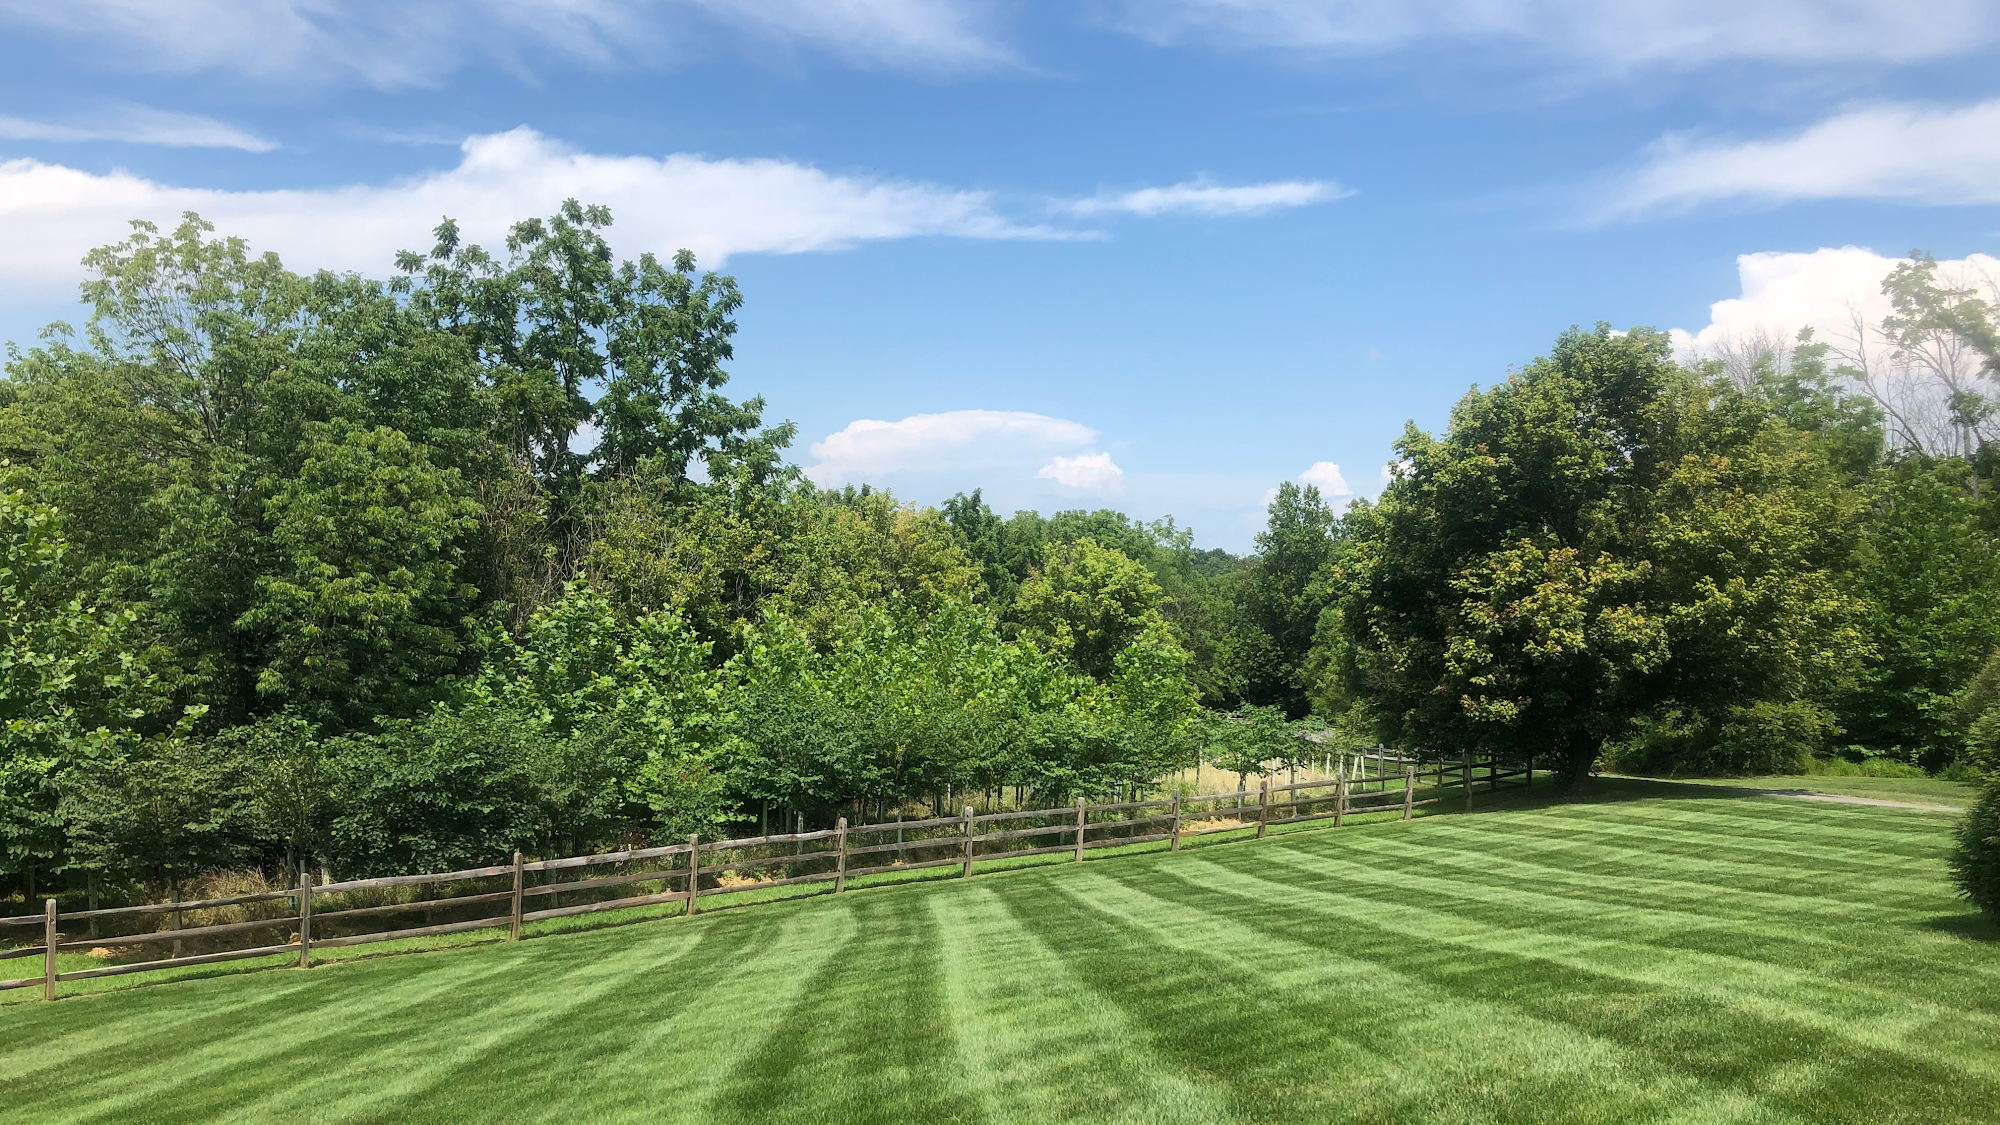 Quality Lawn Care LLC | Residential, Lawn Mowing, Landscaping & Full Property Maintenance